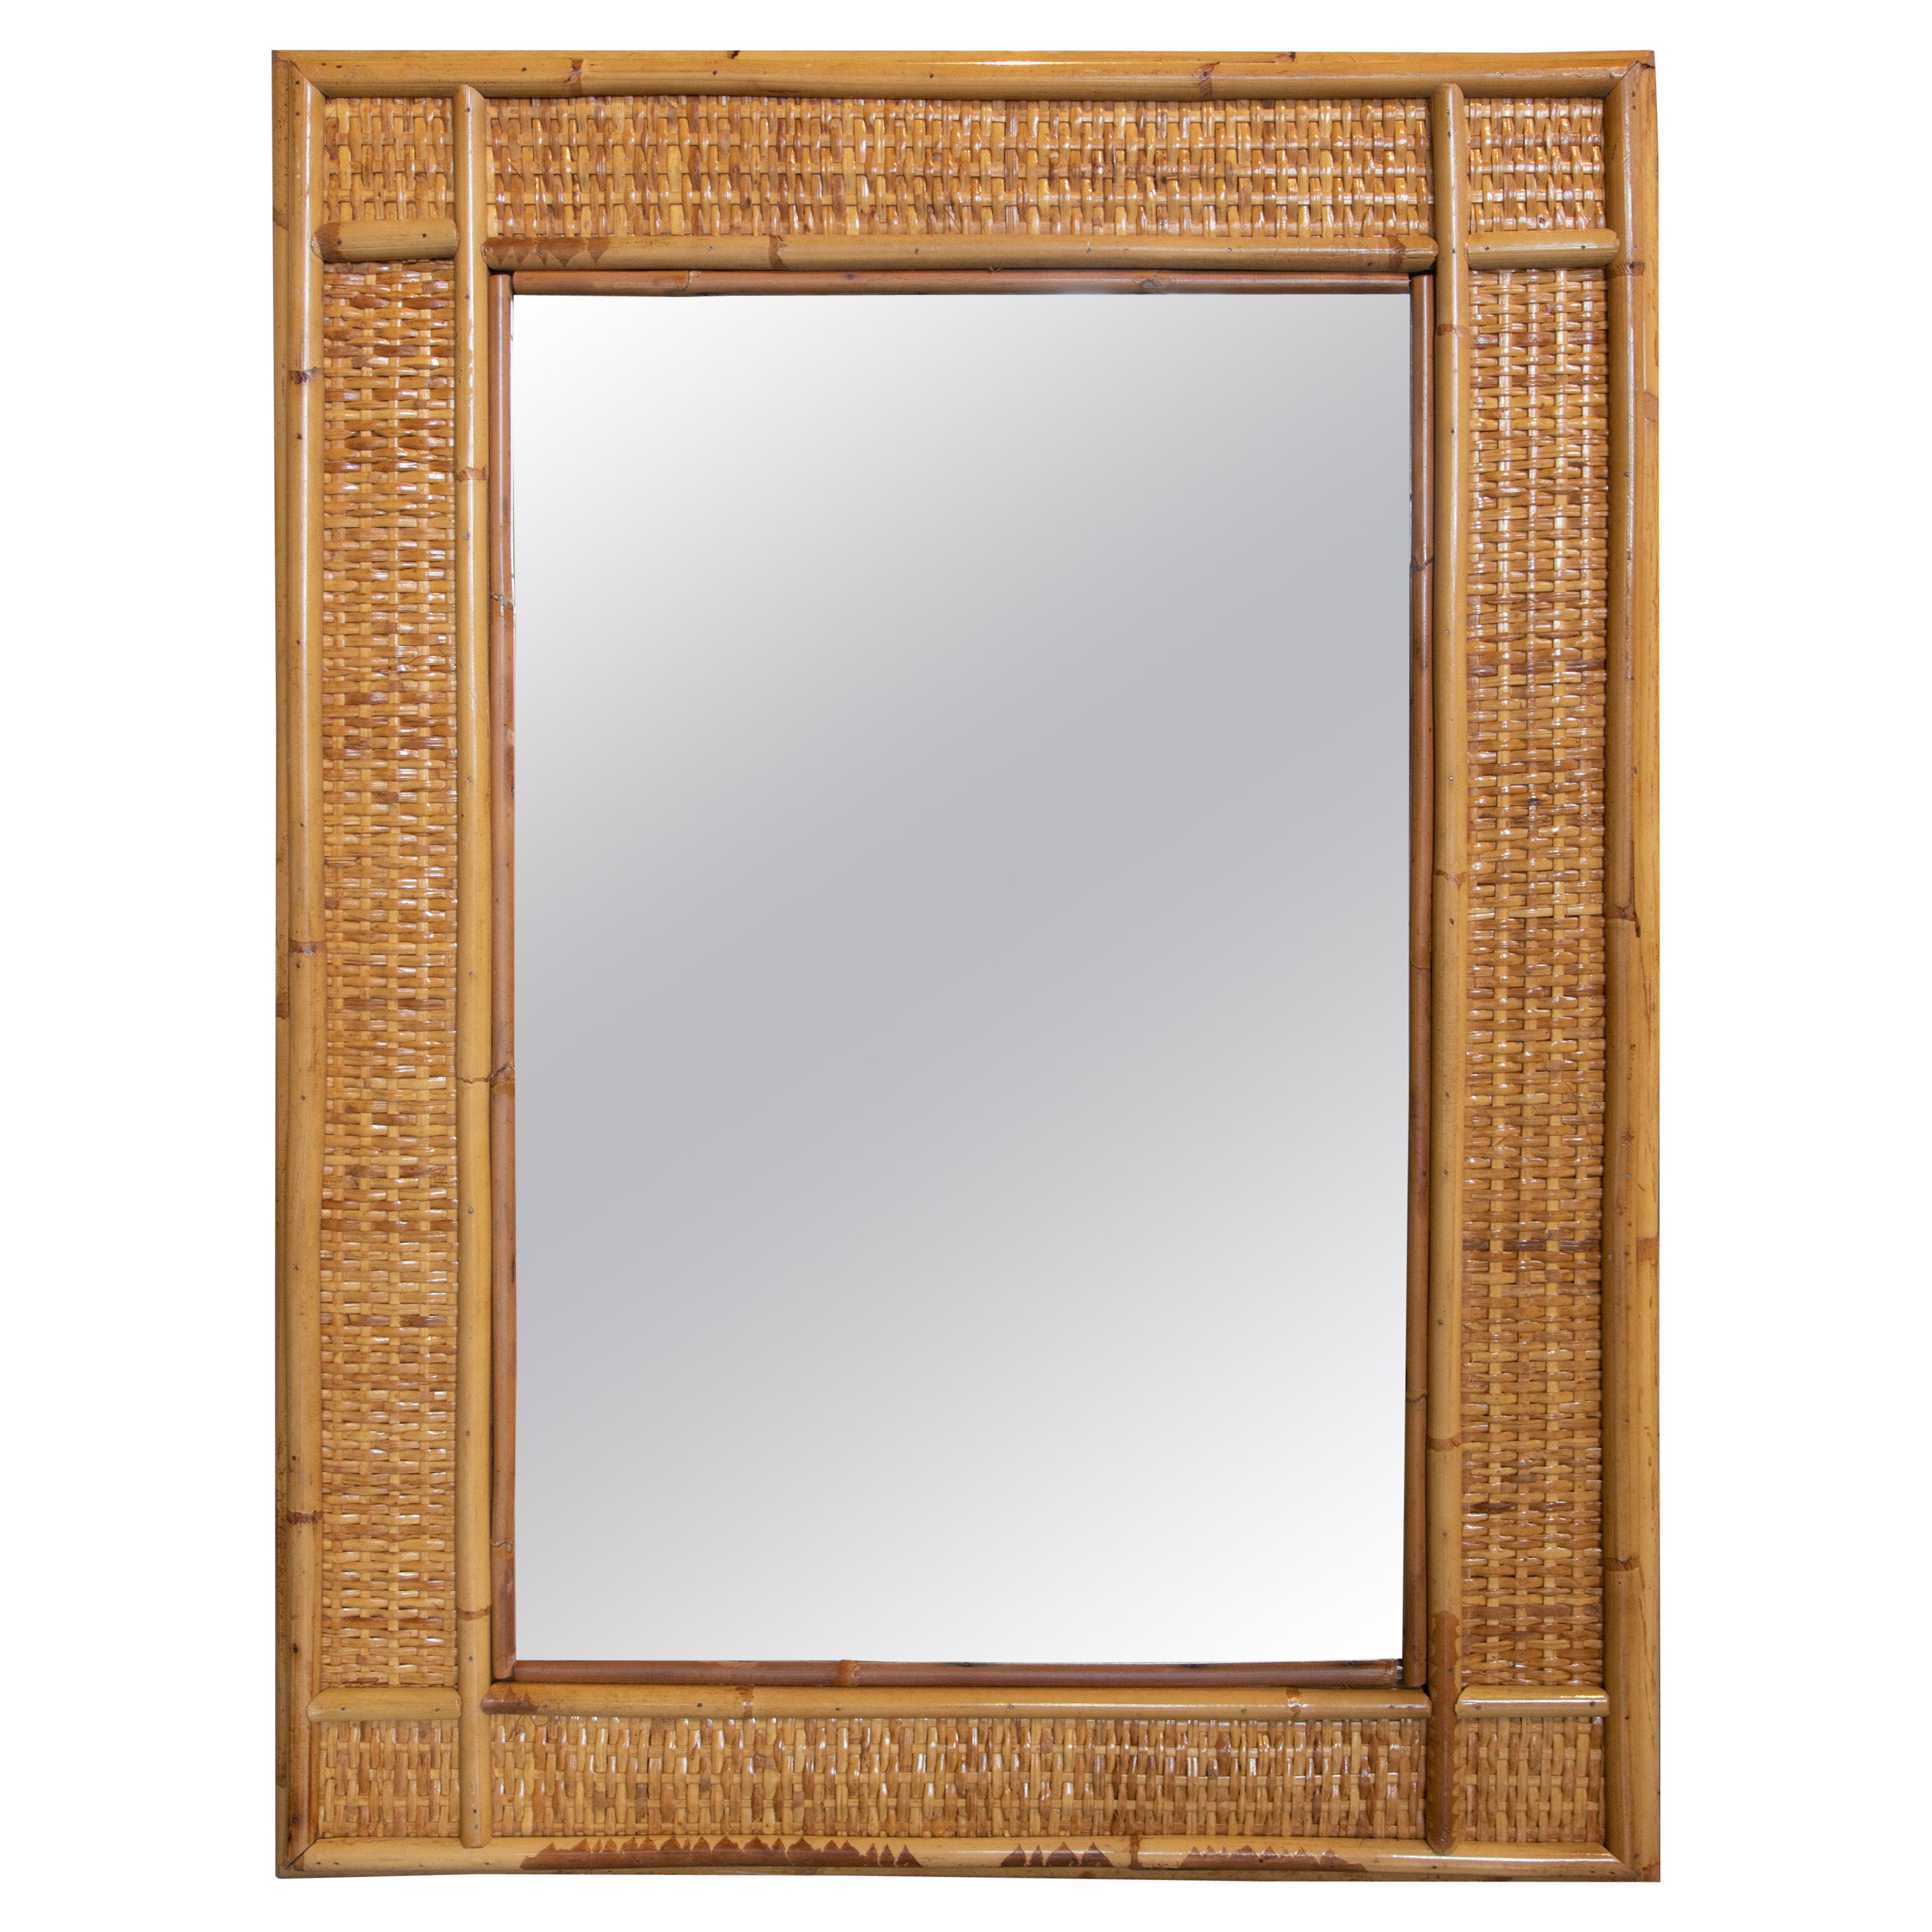  1970s Bamboo and Wicker Wall Mirror